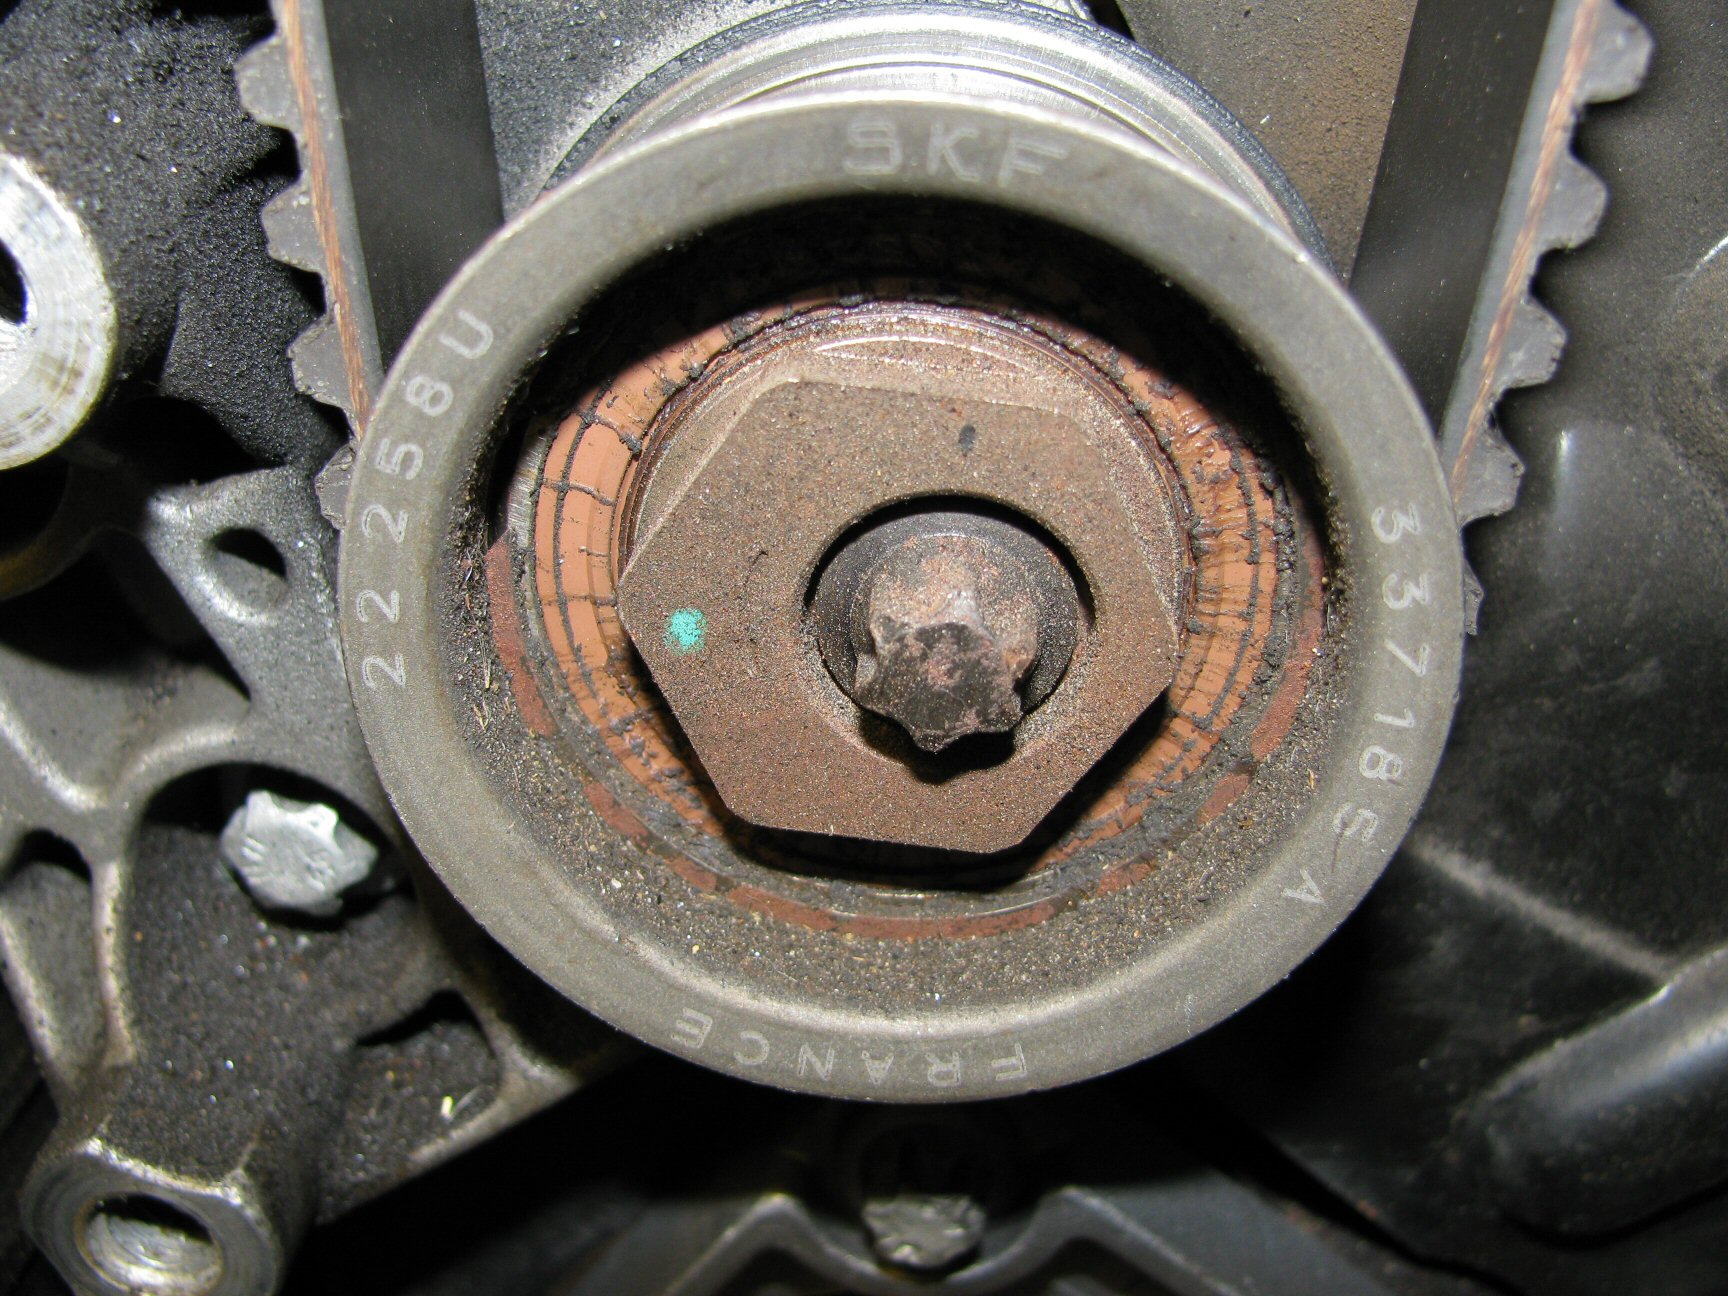 Upper idler pulley. Note the location of the green dot indicating a good initial position of 9 o'clock.